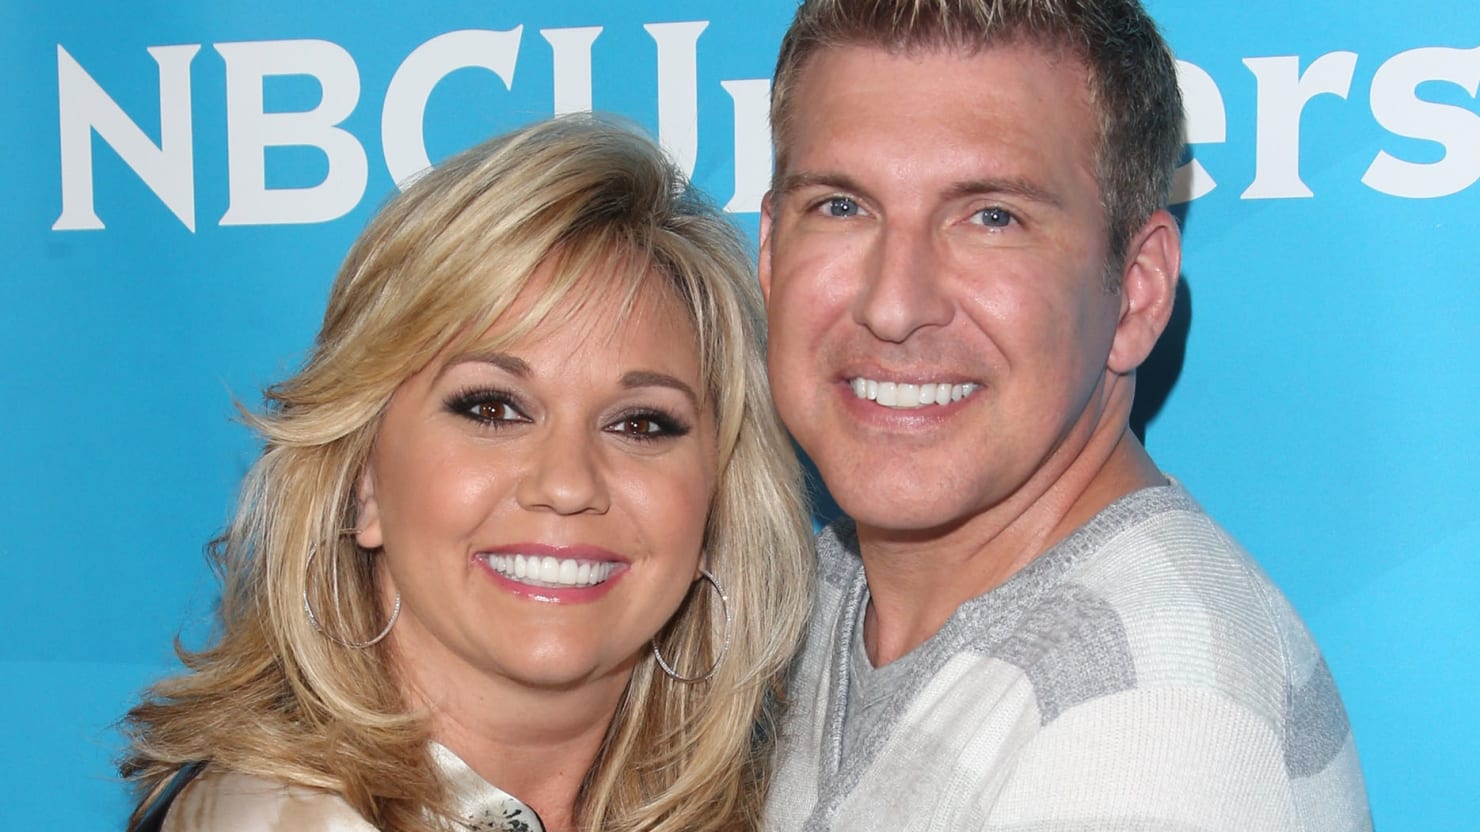 Chrisley Knows Best' Stars Todd and Julie Chrisley Indicted on Tax Eva...